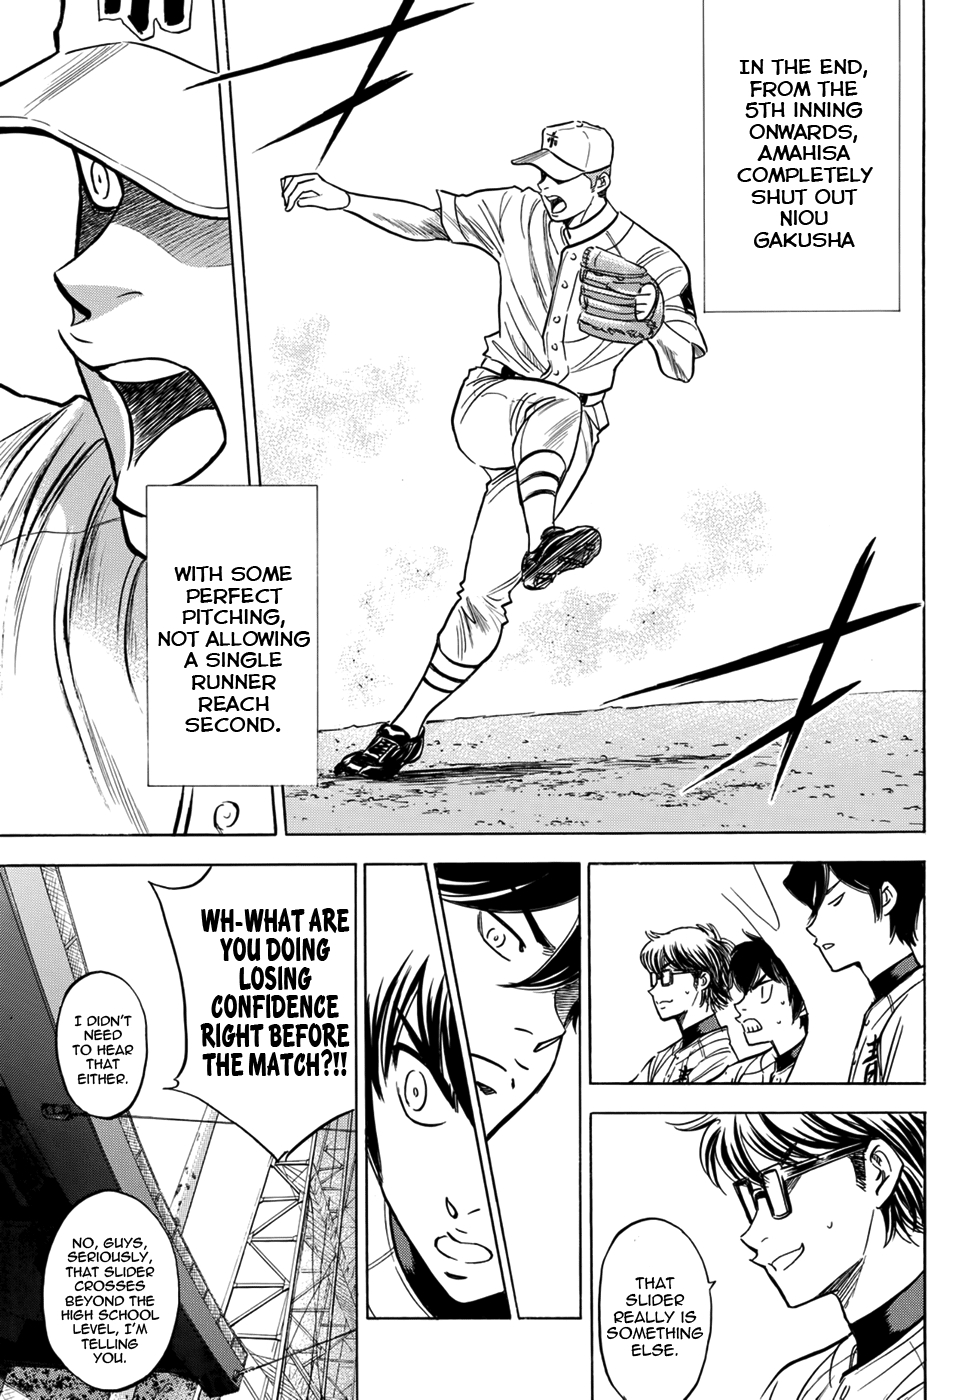 Diamond no Ace Act II Vol. 4 Ch. 31 The Other Places' Aces